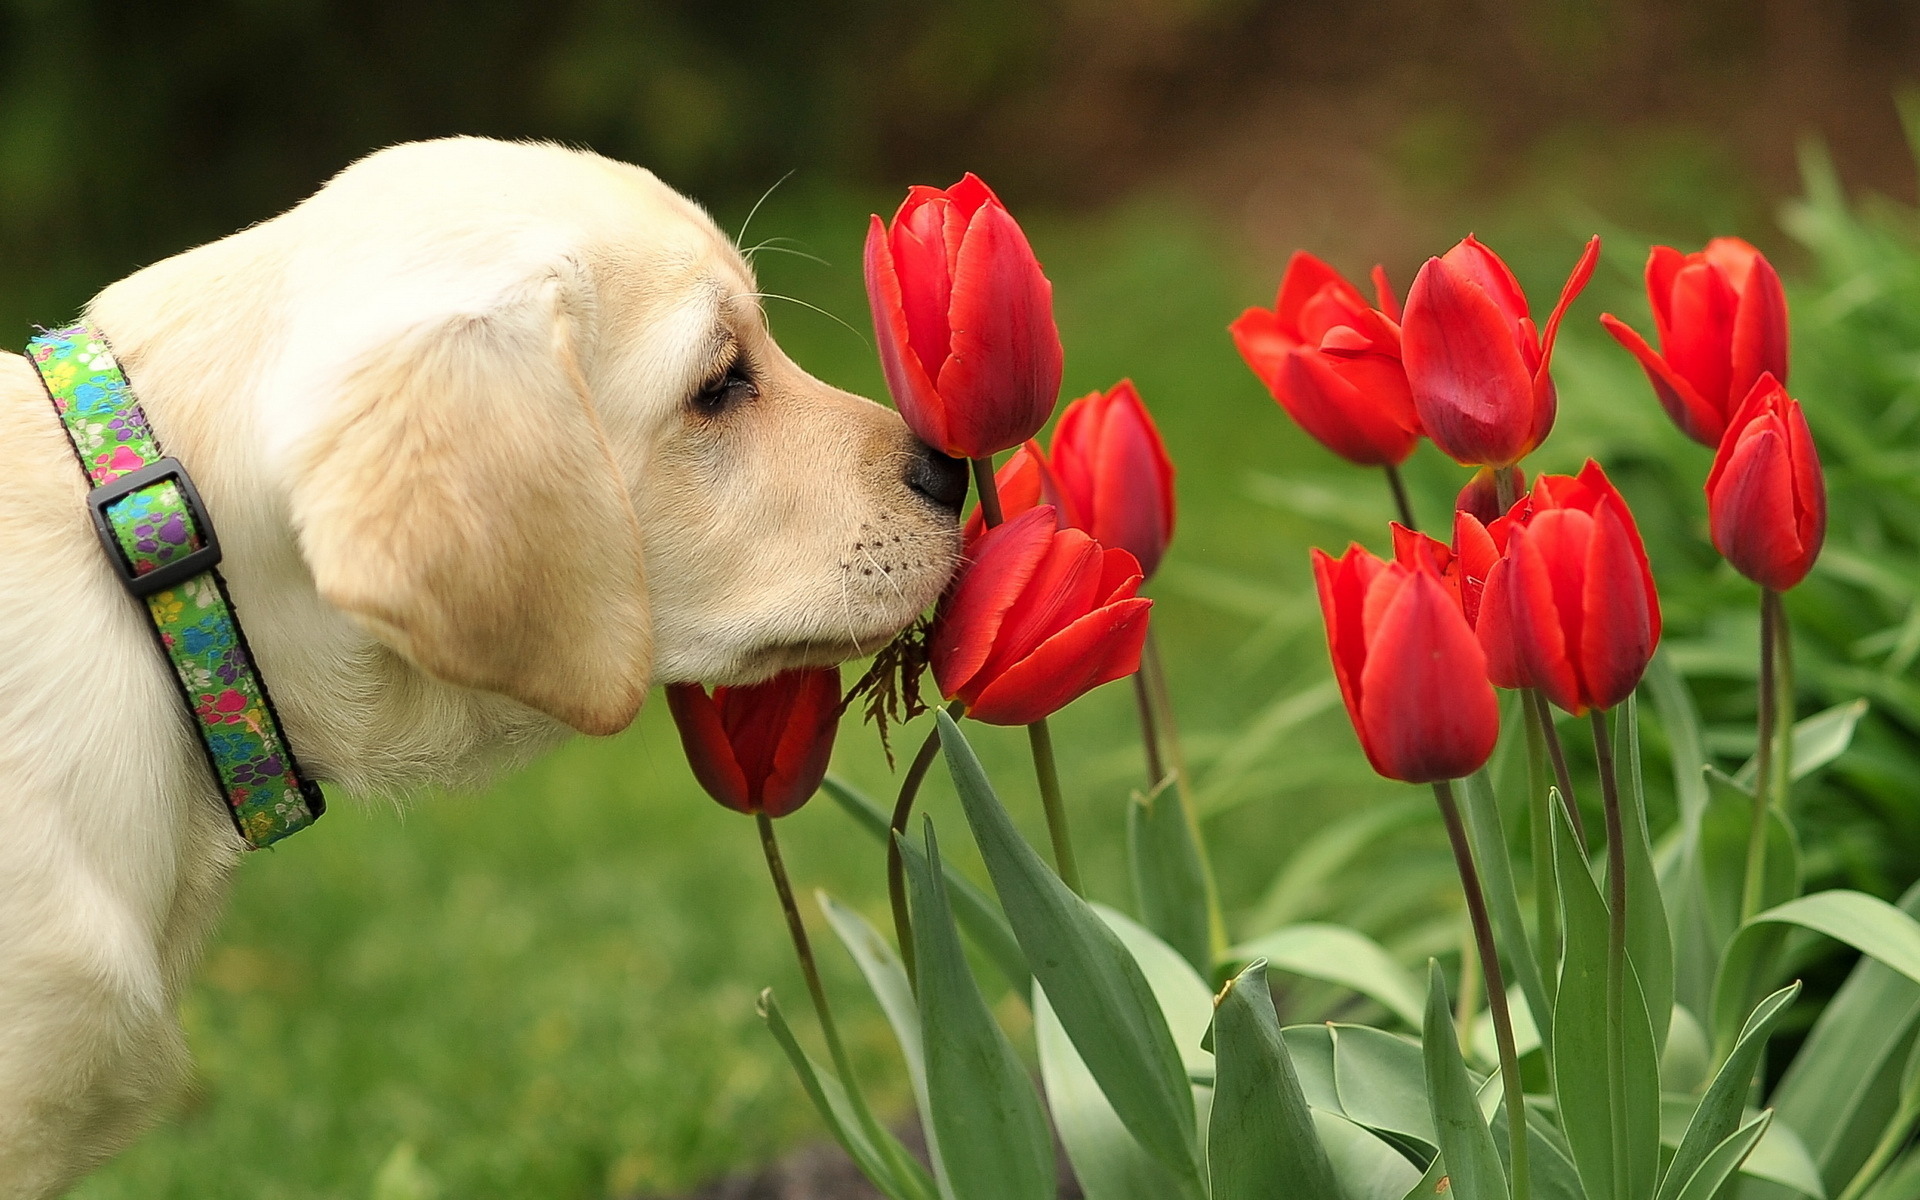 Dog and red tulips 1920 x 1200 Animals Photography MIRIADNA 1920x1200